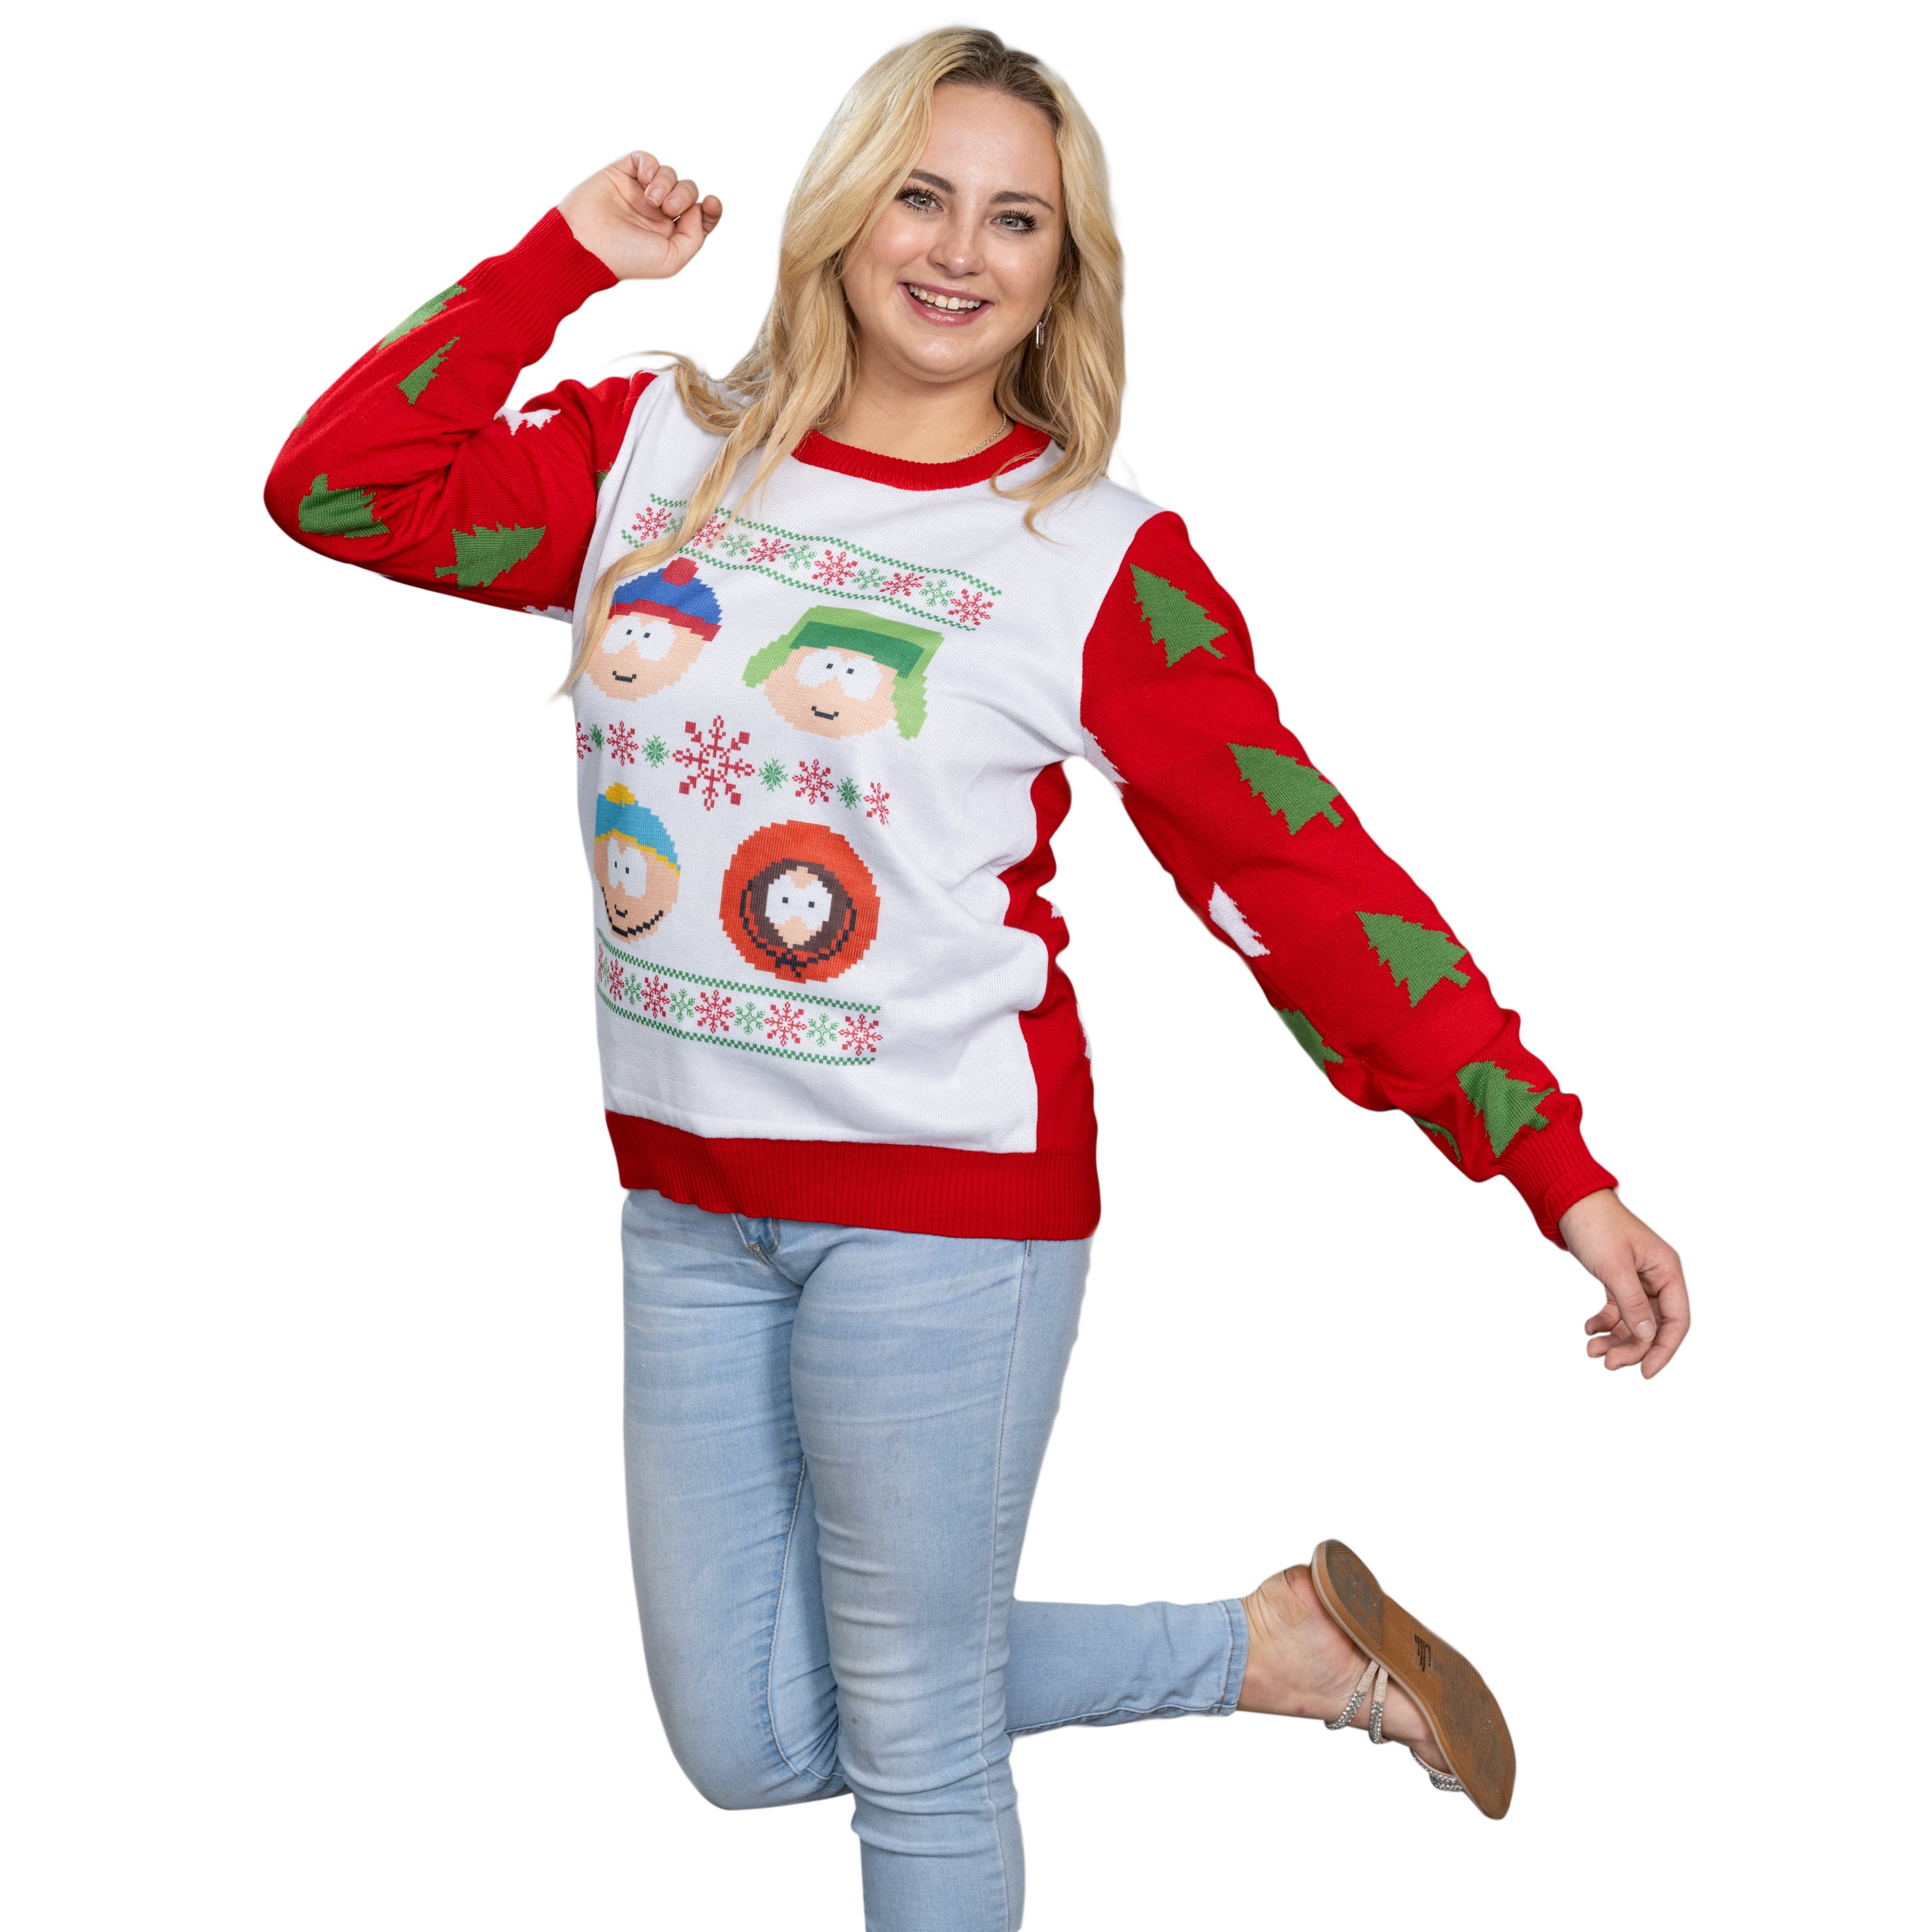 South Park Stan Kyle Cartman Kenny Faces Ugly Christmas Sweater